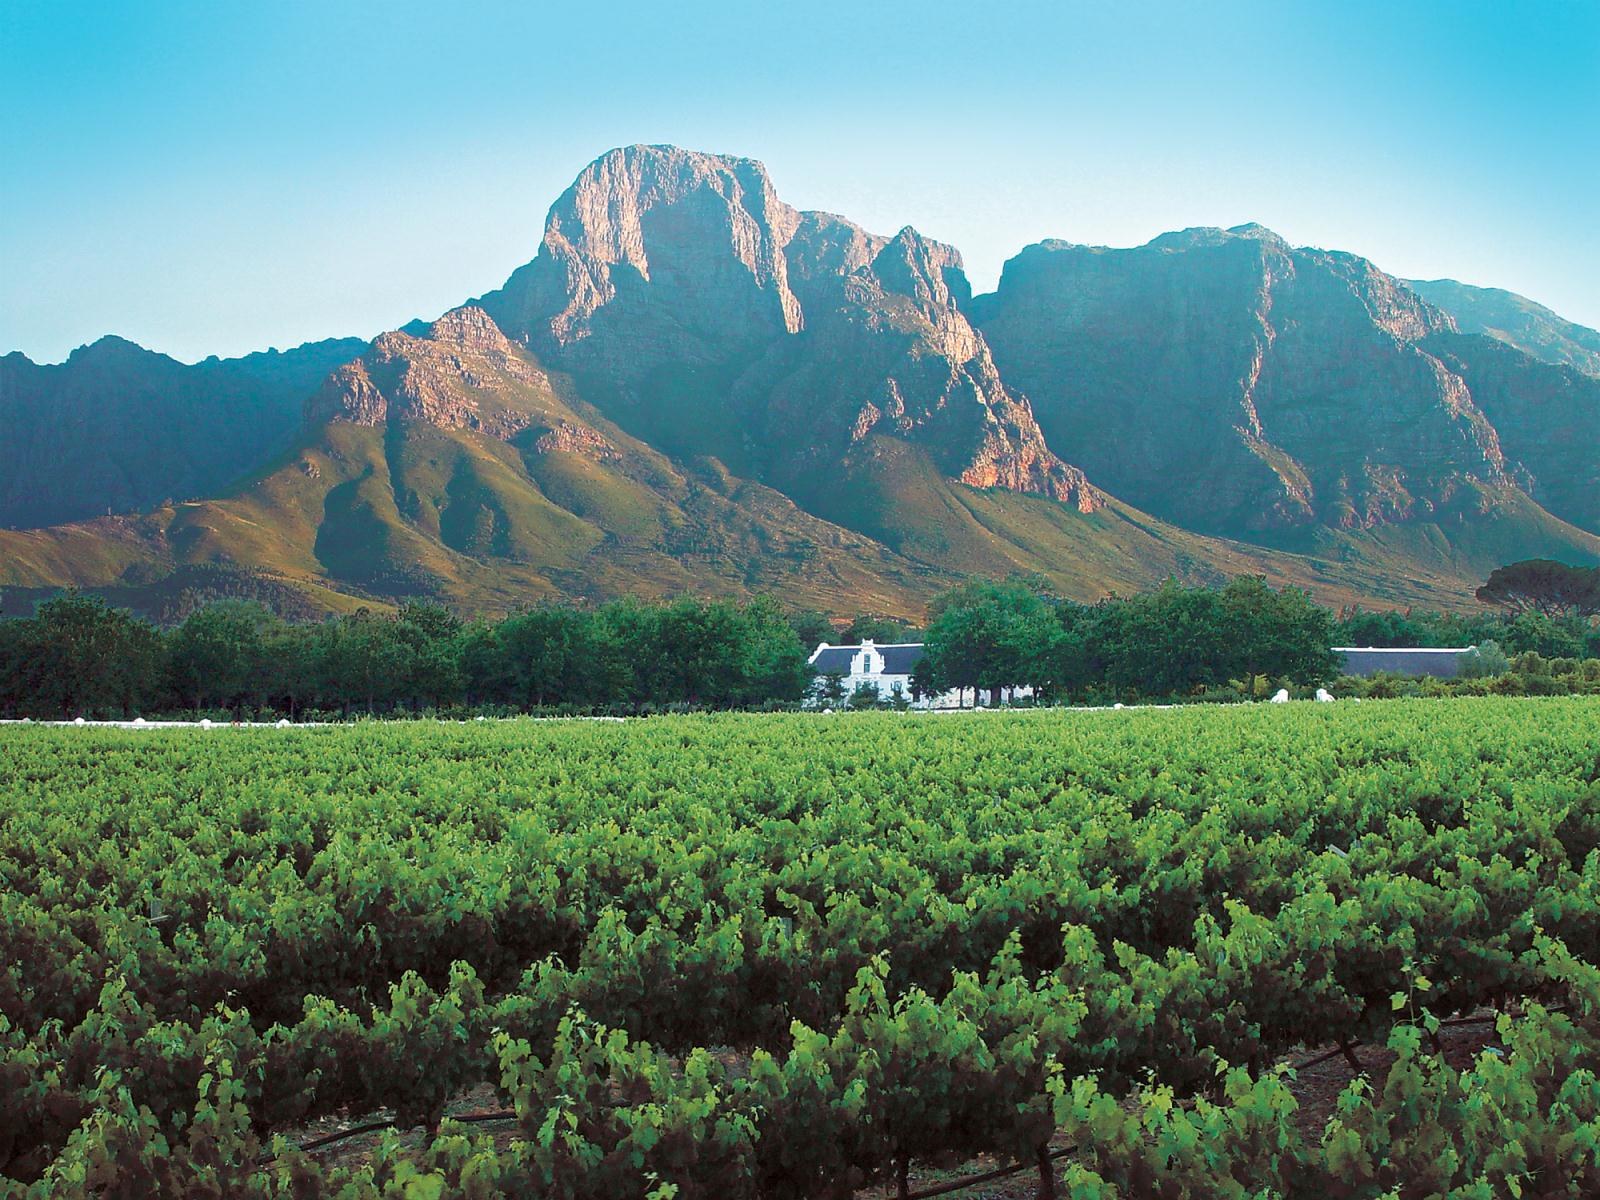 Winelands - Scott Dunn’s Flagship South Africa and Mozambique Experience